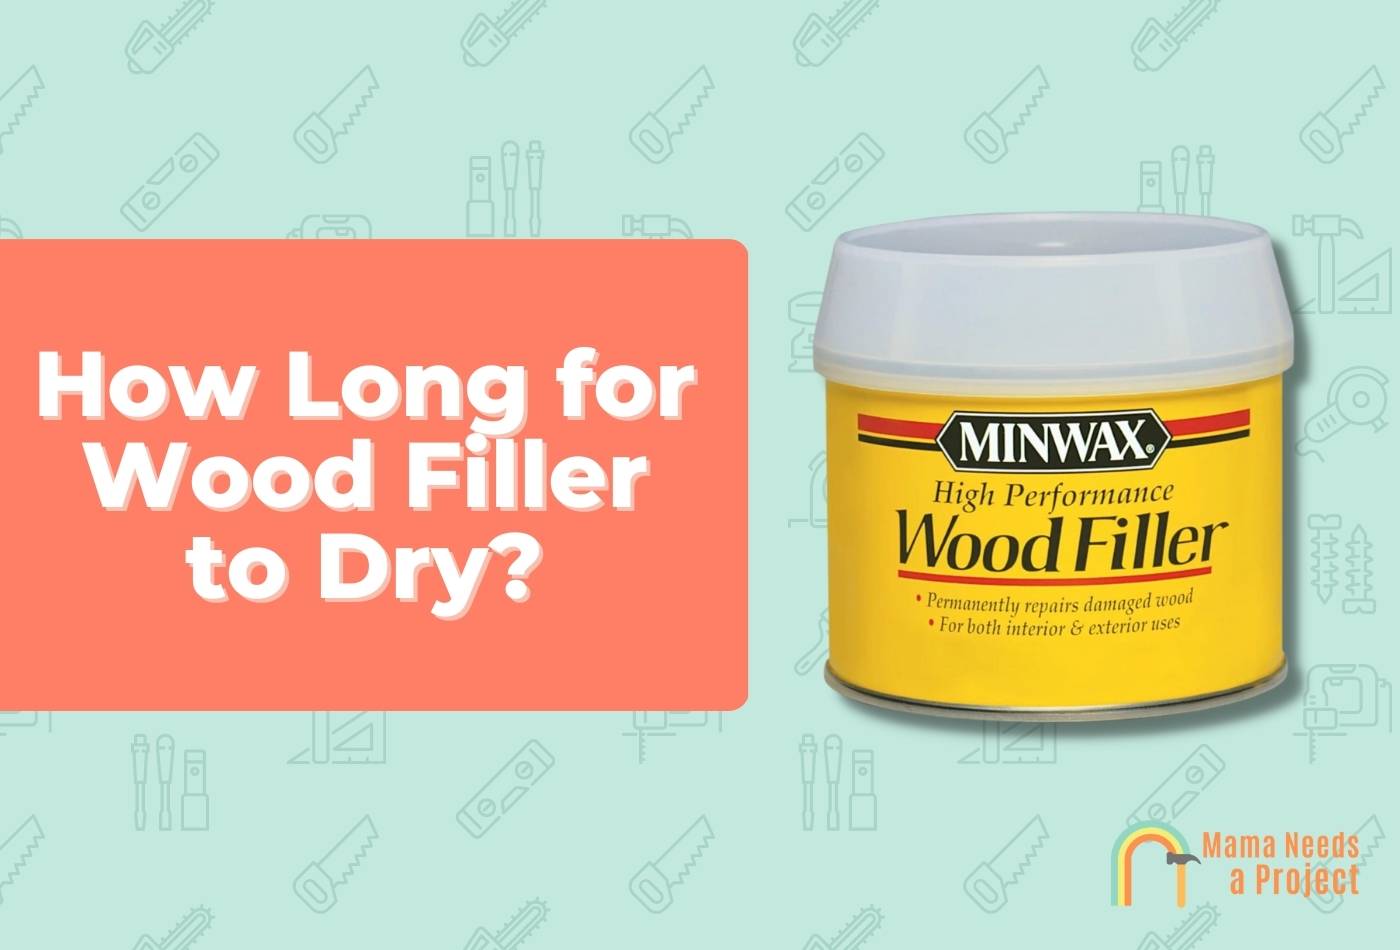 How Long for Wood Filler to Dry